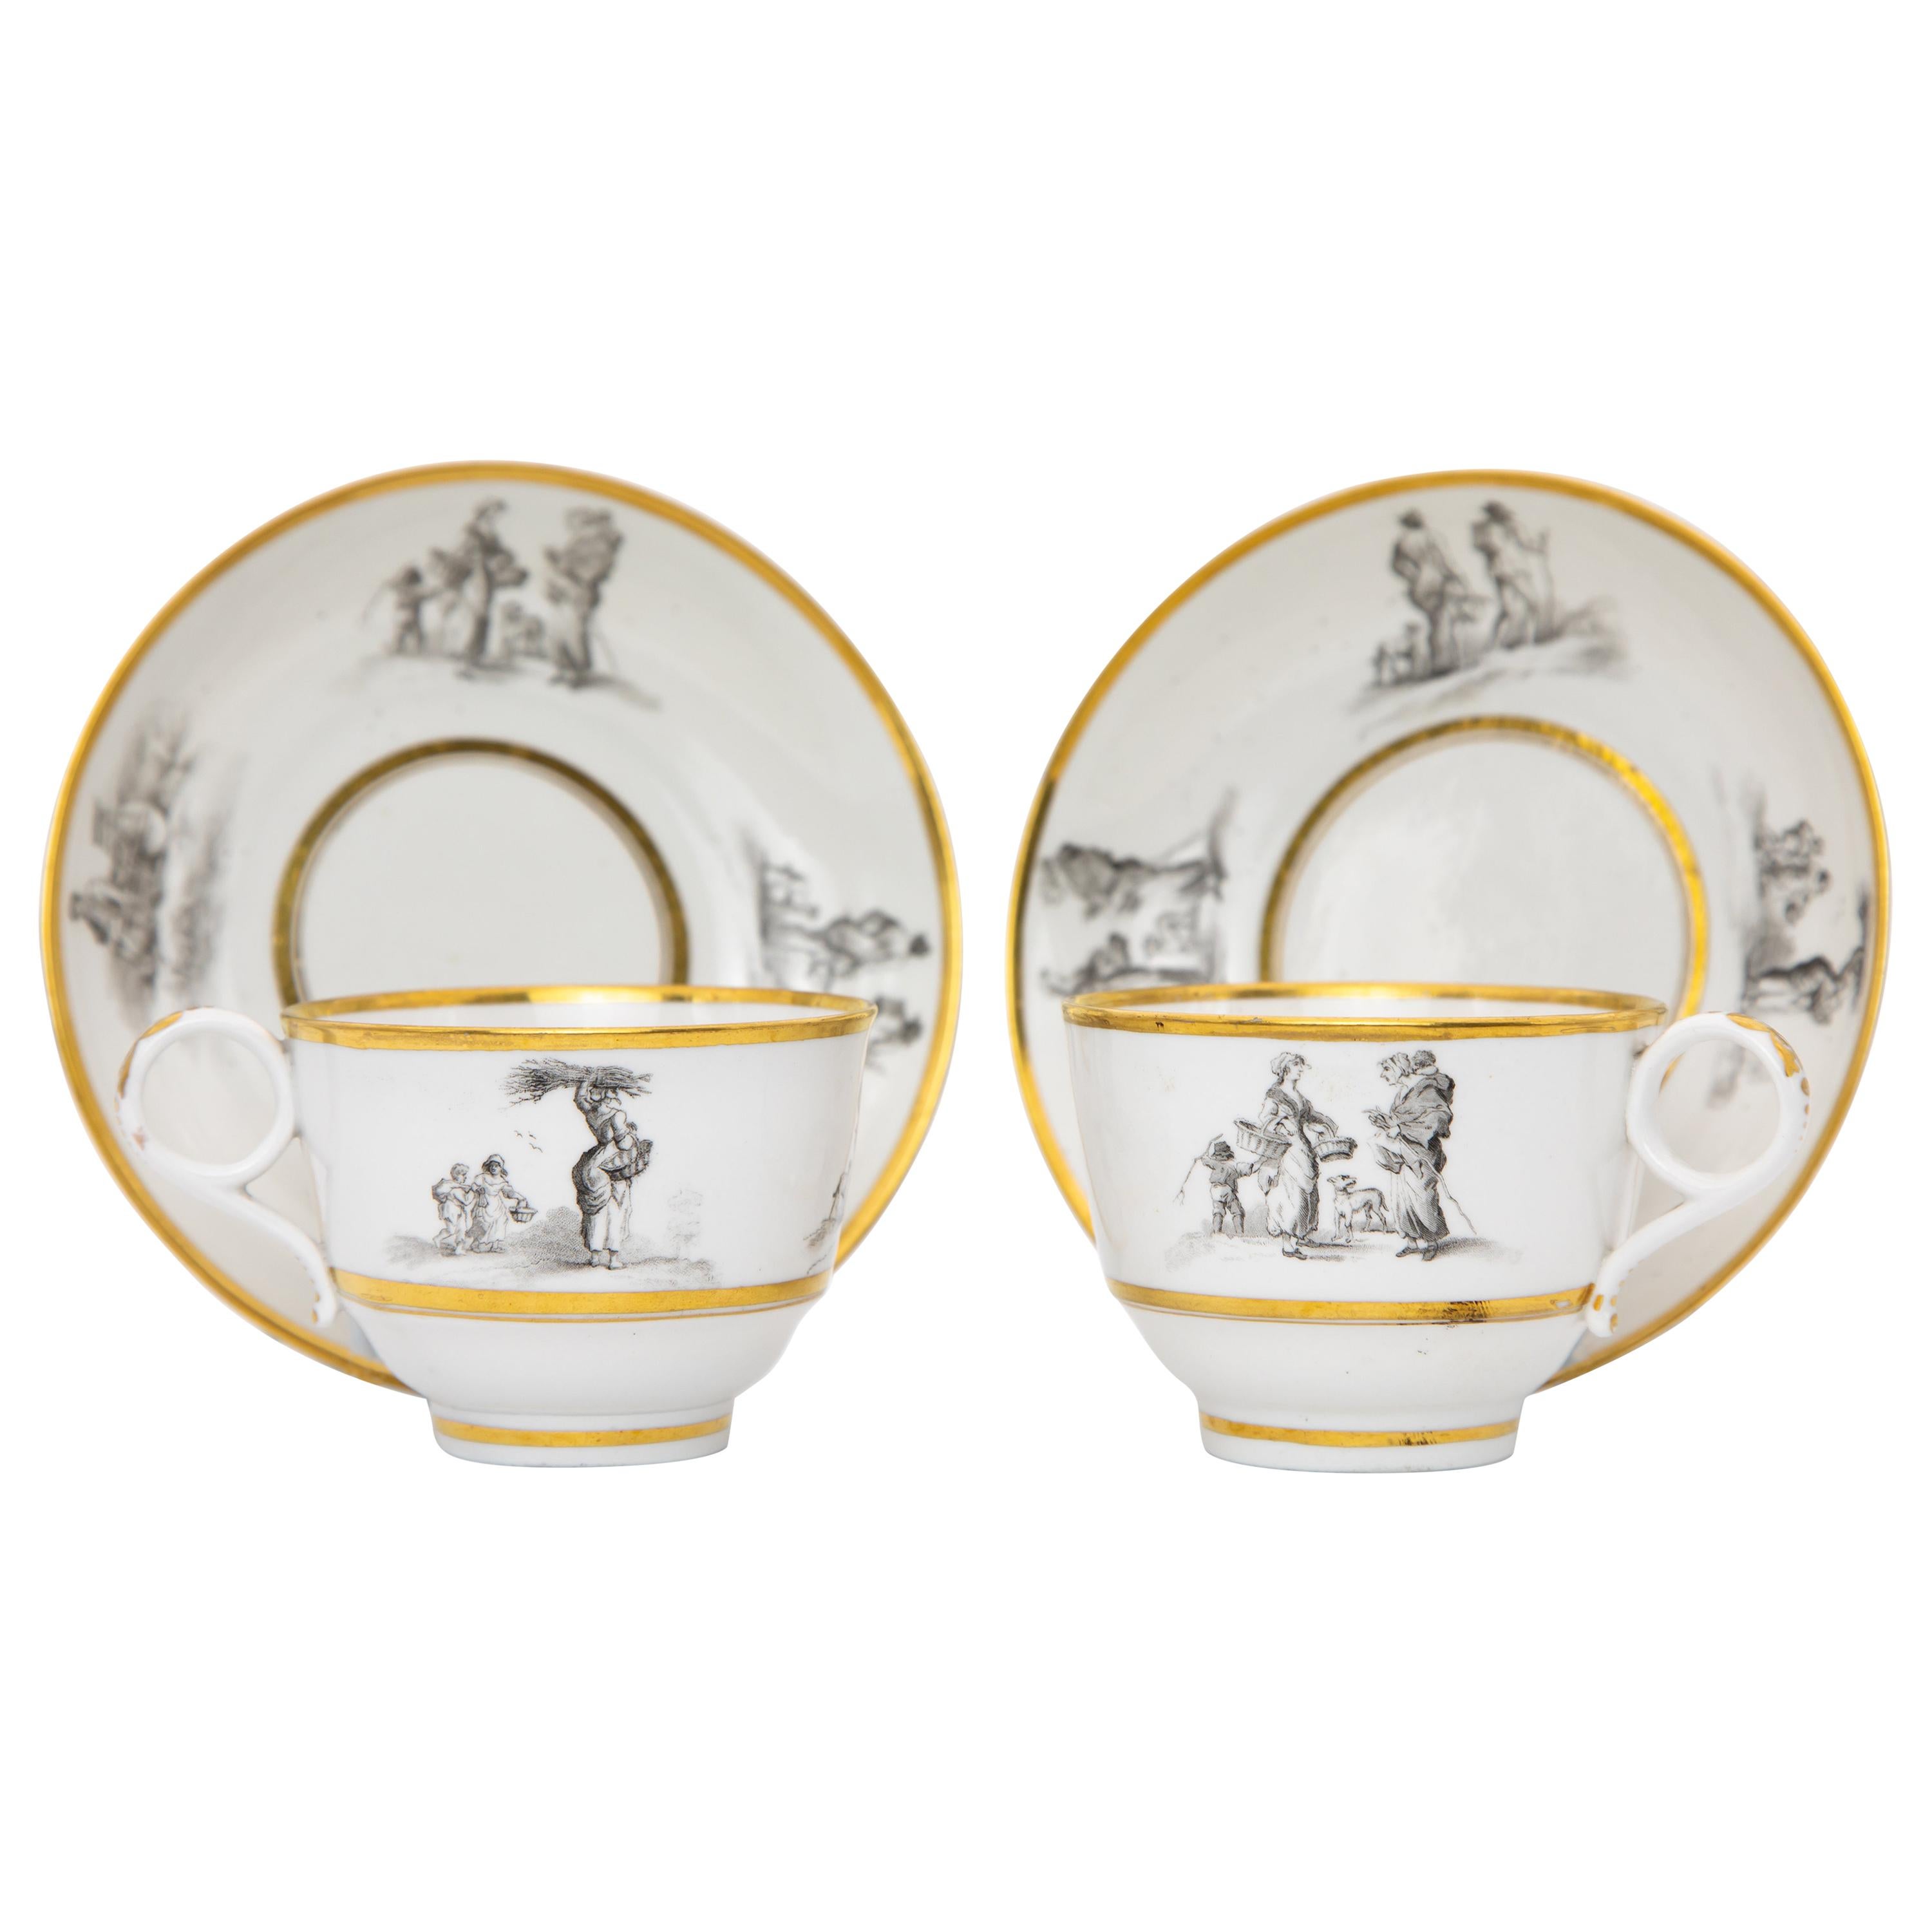 Pair of Early Barr Flight Barr Porcelain Teacups and Saucers For Sale